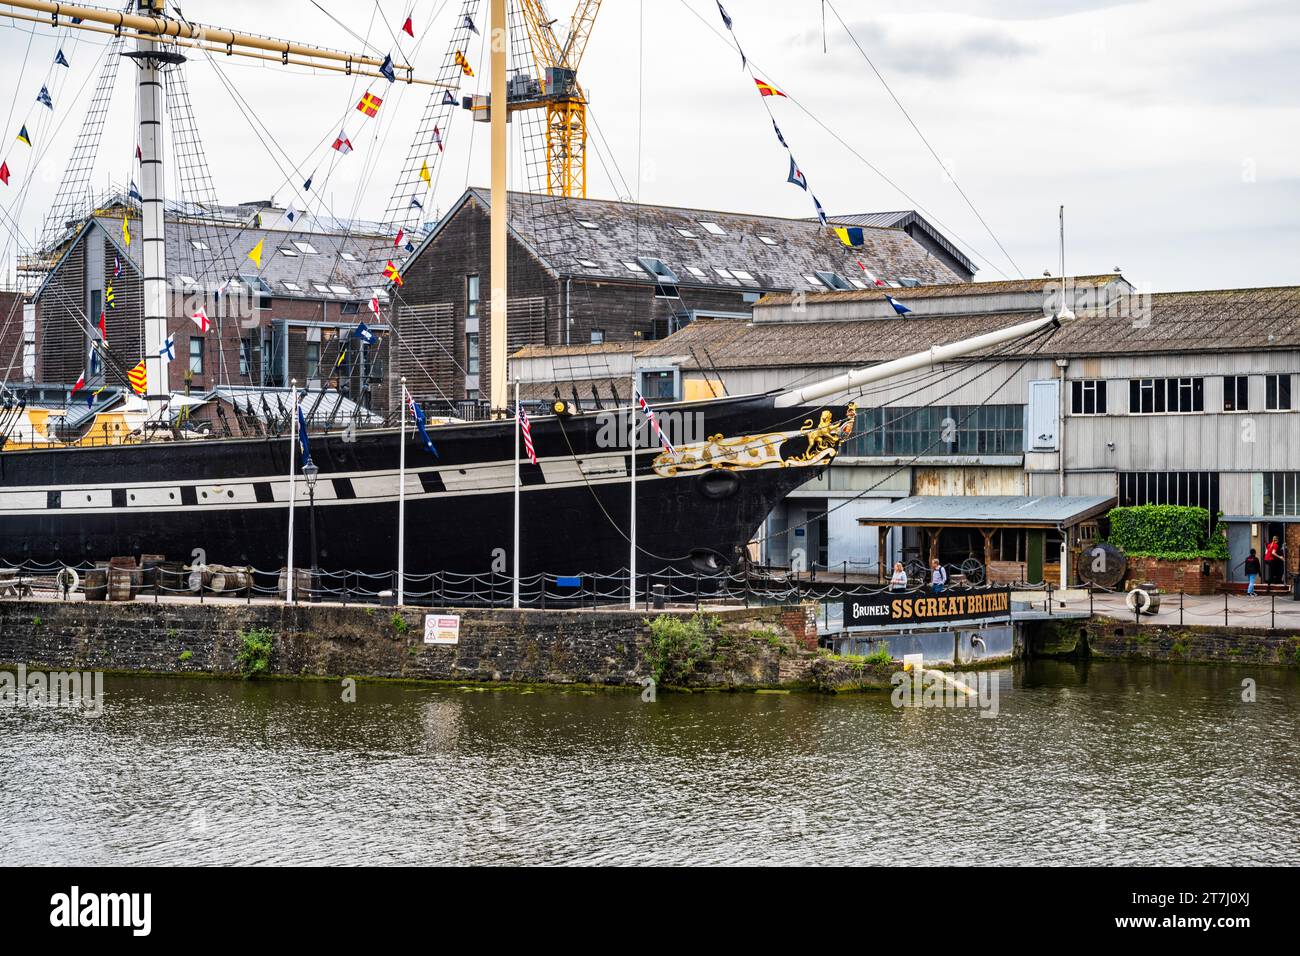 Brunel's iron ship, SS Great Britain, is a museum ship and former passenger steamship, in dry dock at the Great Western Dockyard, Bristol, England, UK Stock Photo